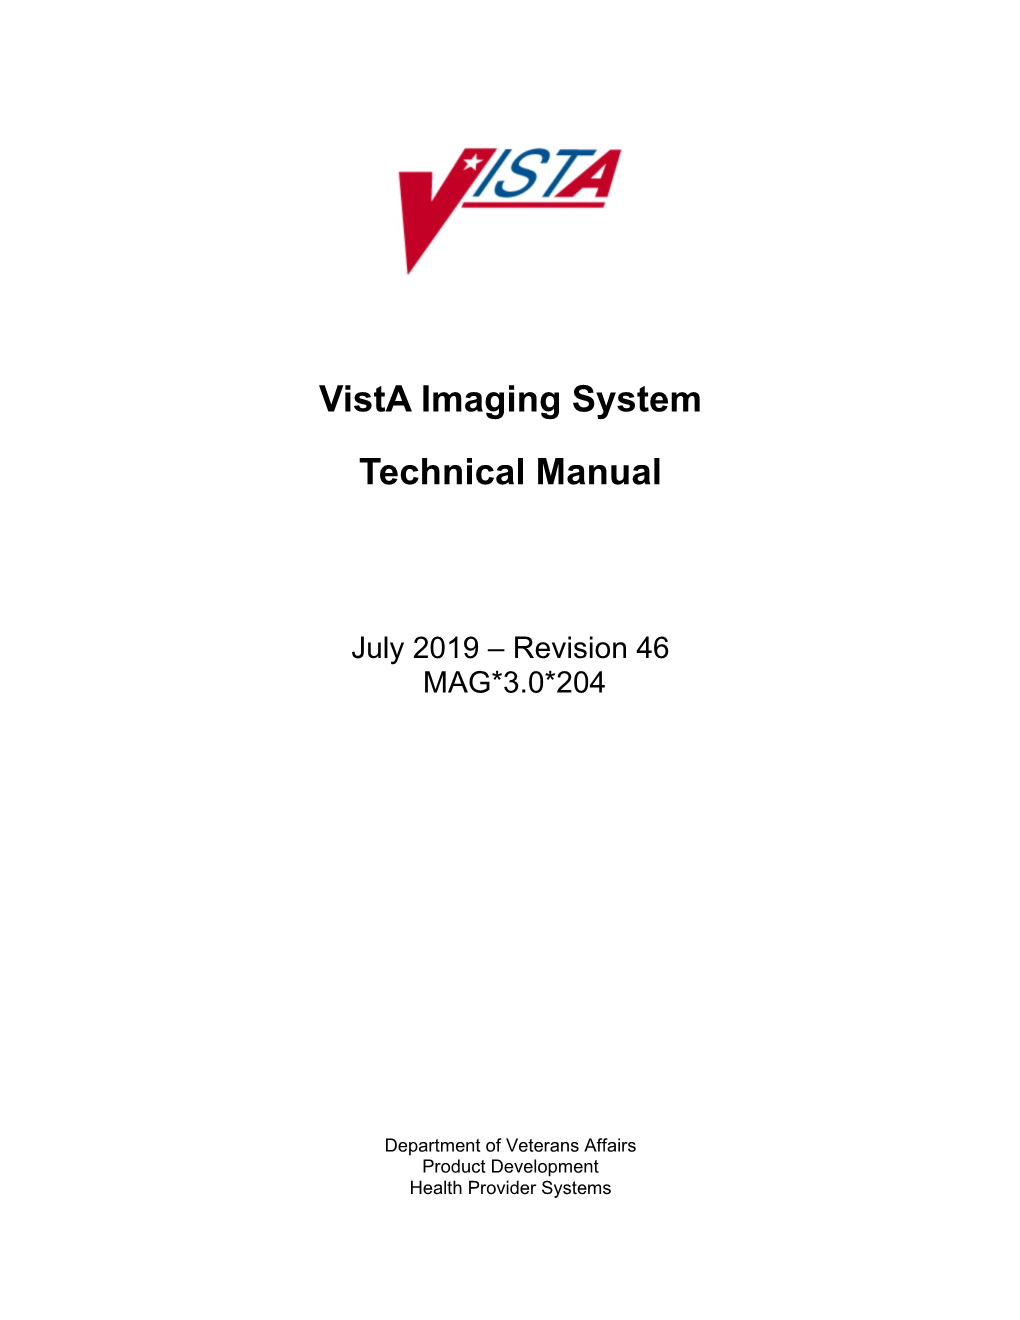 Vista Imaging System Technical Manual Is Part of a Suite of Manuals That Includes a Release Notes Document, Security Guide, User Manuals and Installation Guides